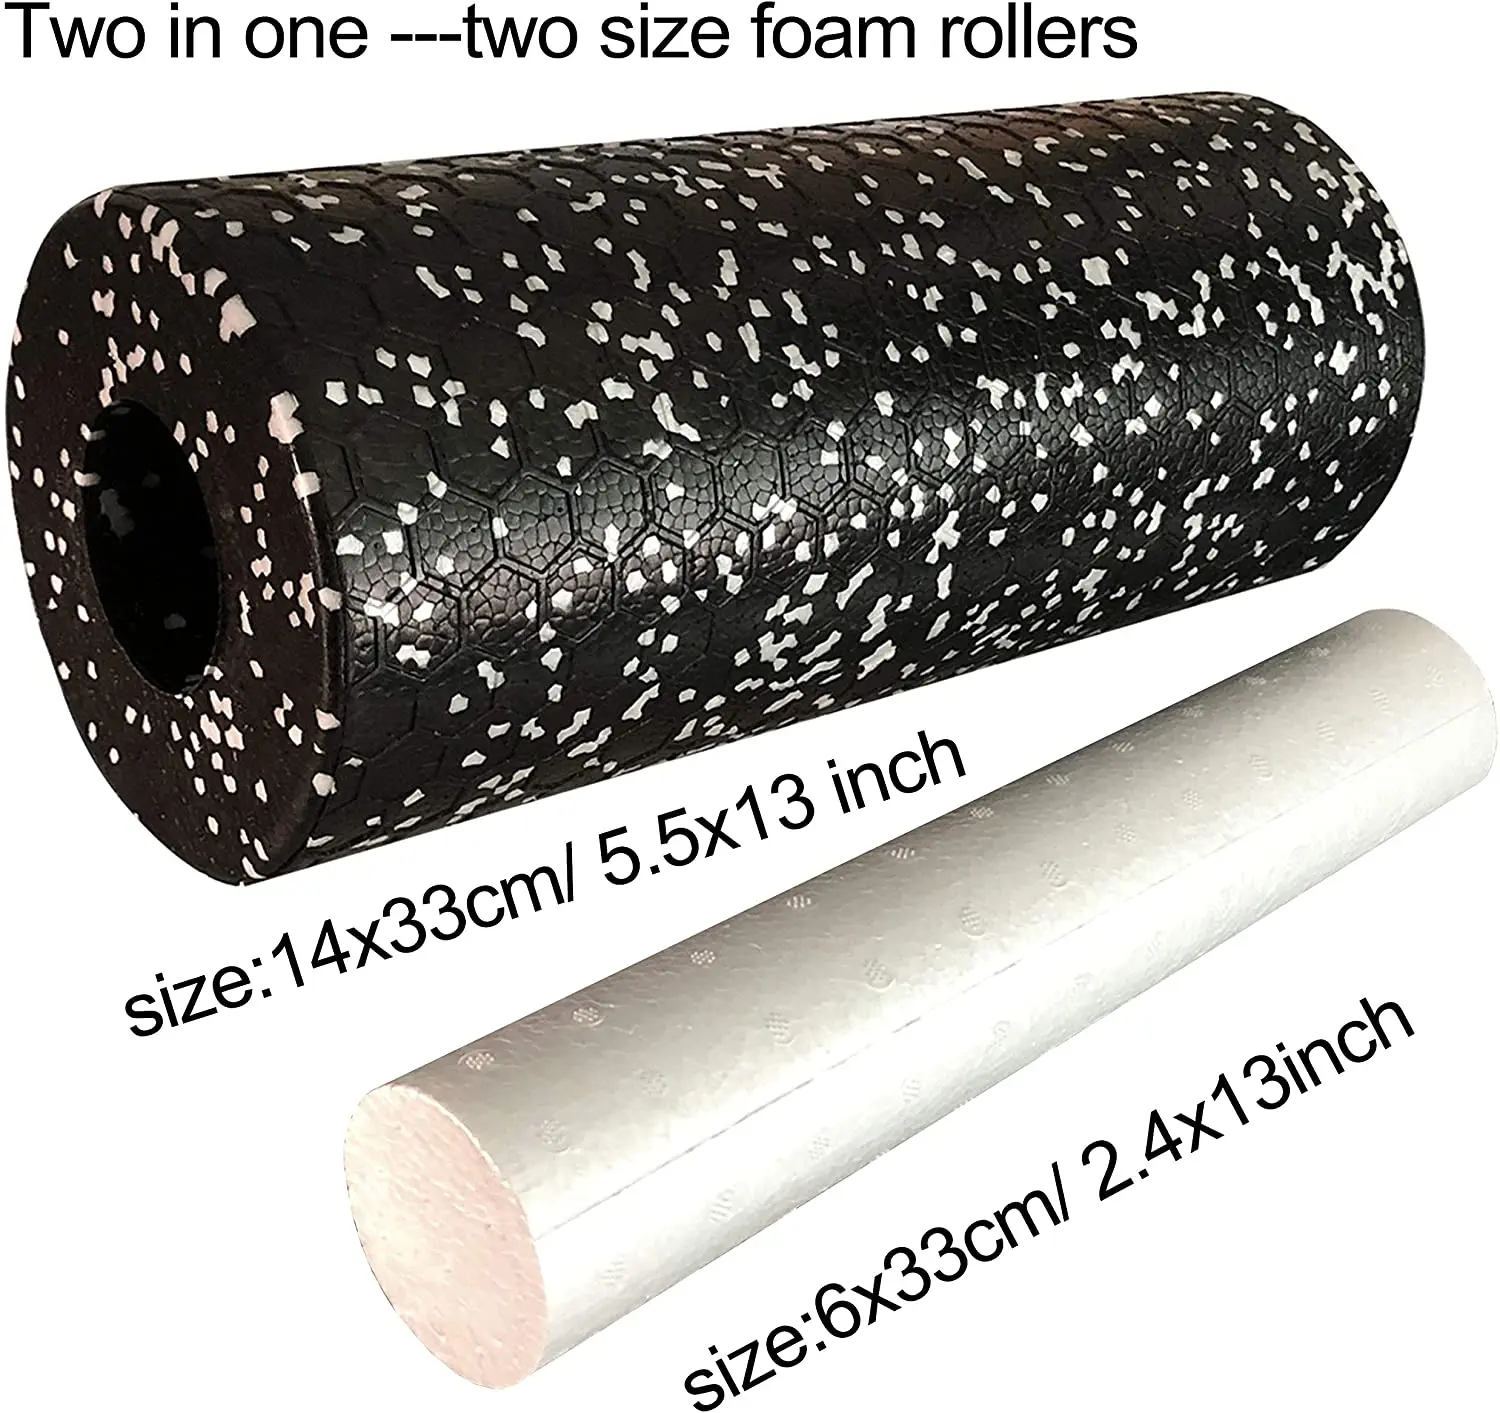 Fitness Yoga Roller EPP 2 in 1 Foam Roller Set for Deep Tissue Massage and Exercise, Neck Back Leg Arm Feet Muscles Recovery